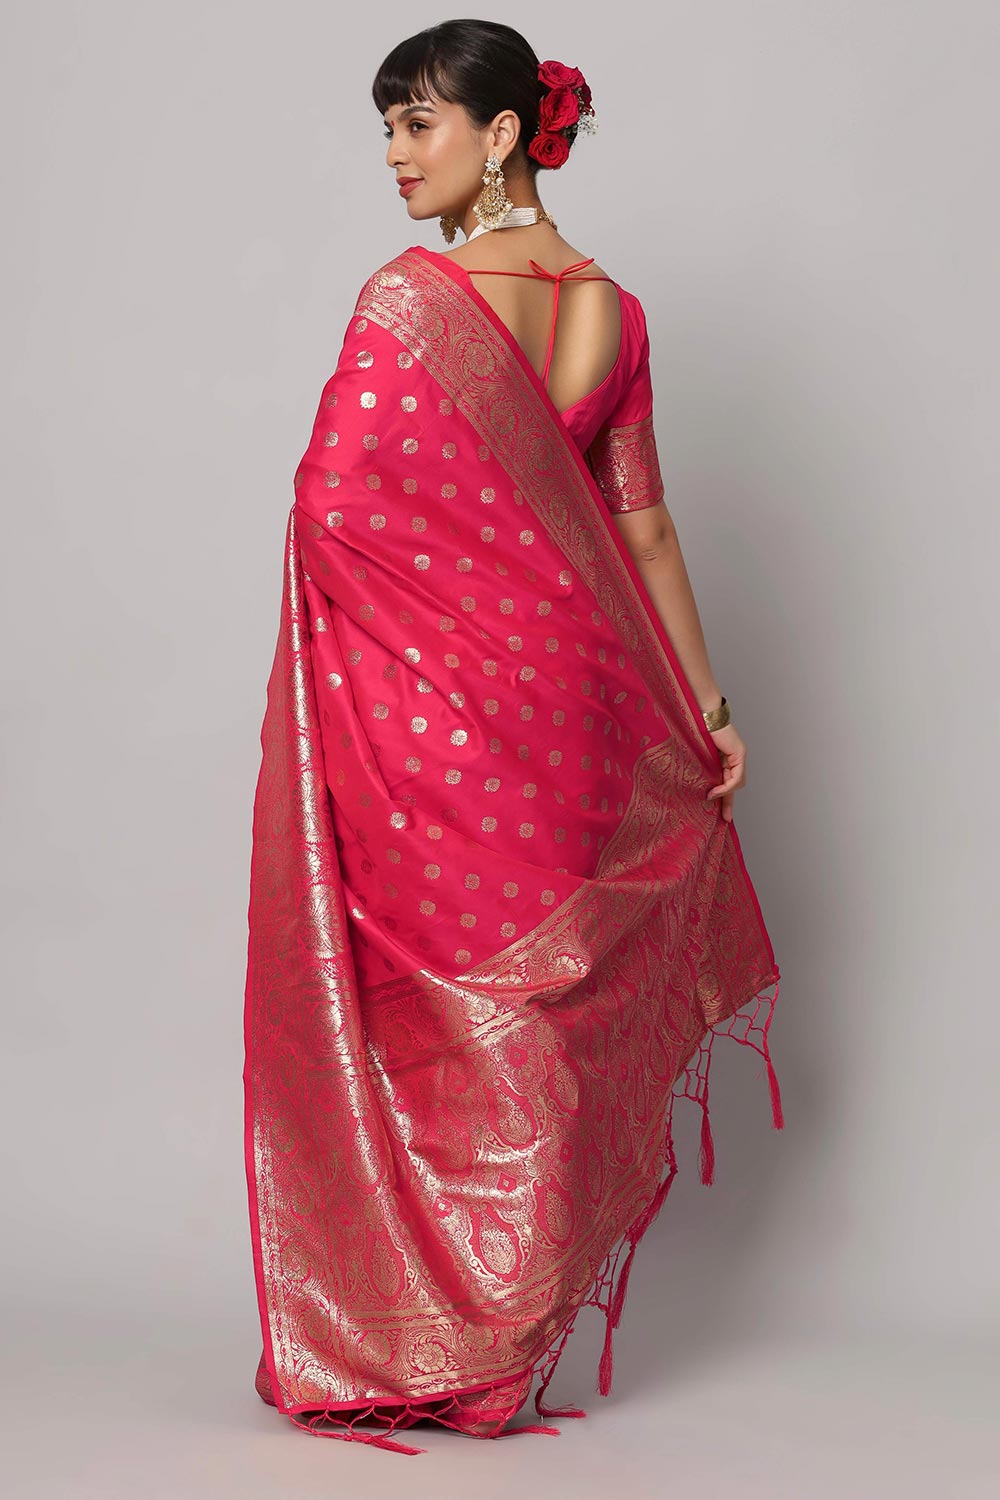 Shop Riya Rani Pink & Gold Full Embroidered Banarasi One Minute Saree at best offer at our  Store - One Minute Saree